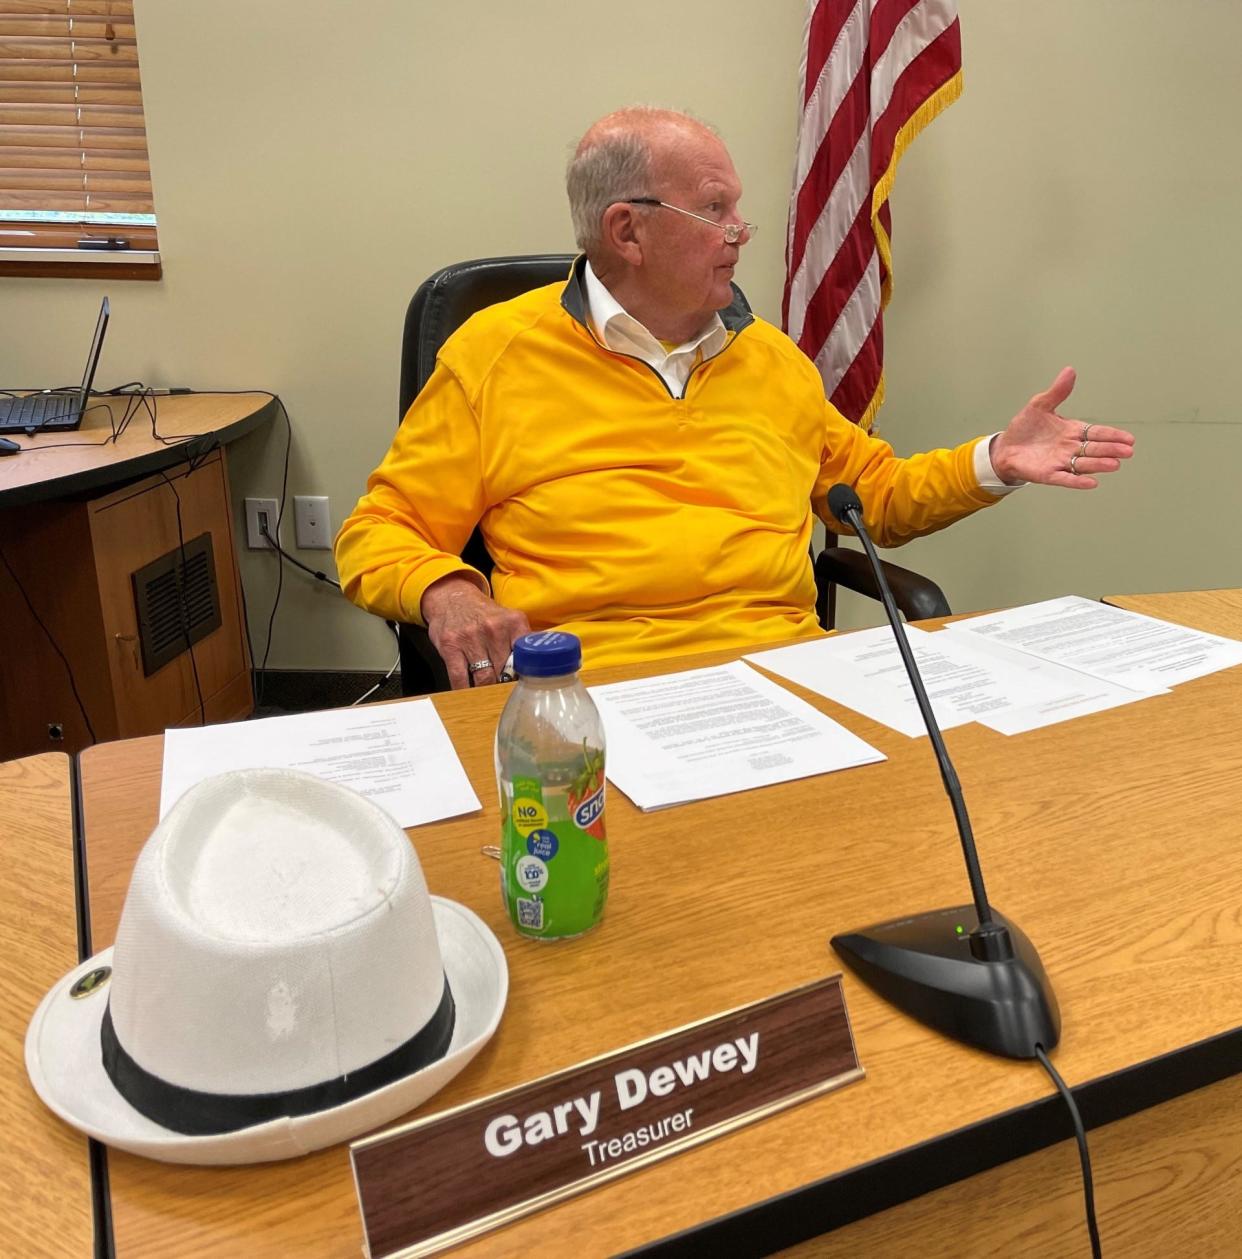 After more than three decades in Laketown Township government, Gary Dewey has decided to focus on his family.